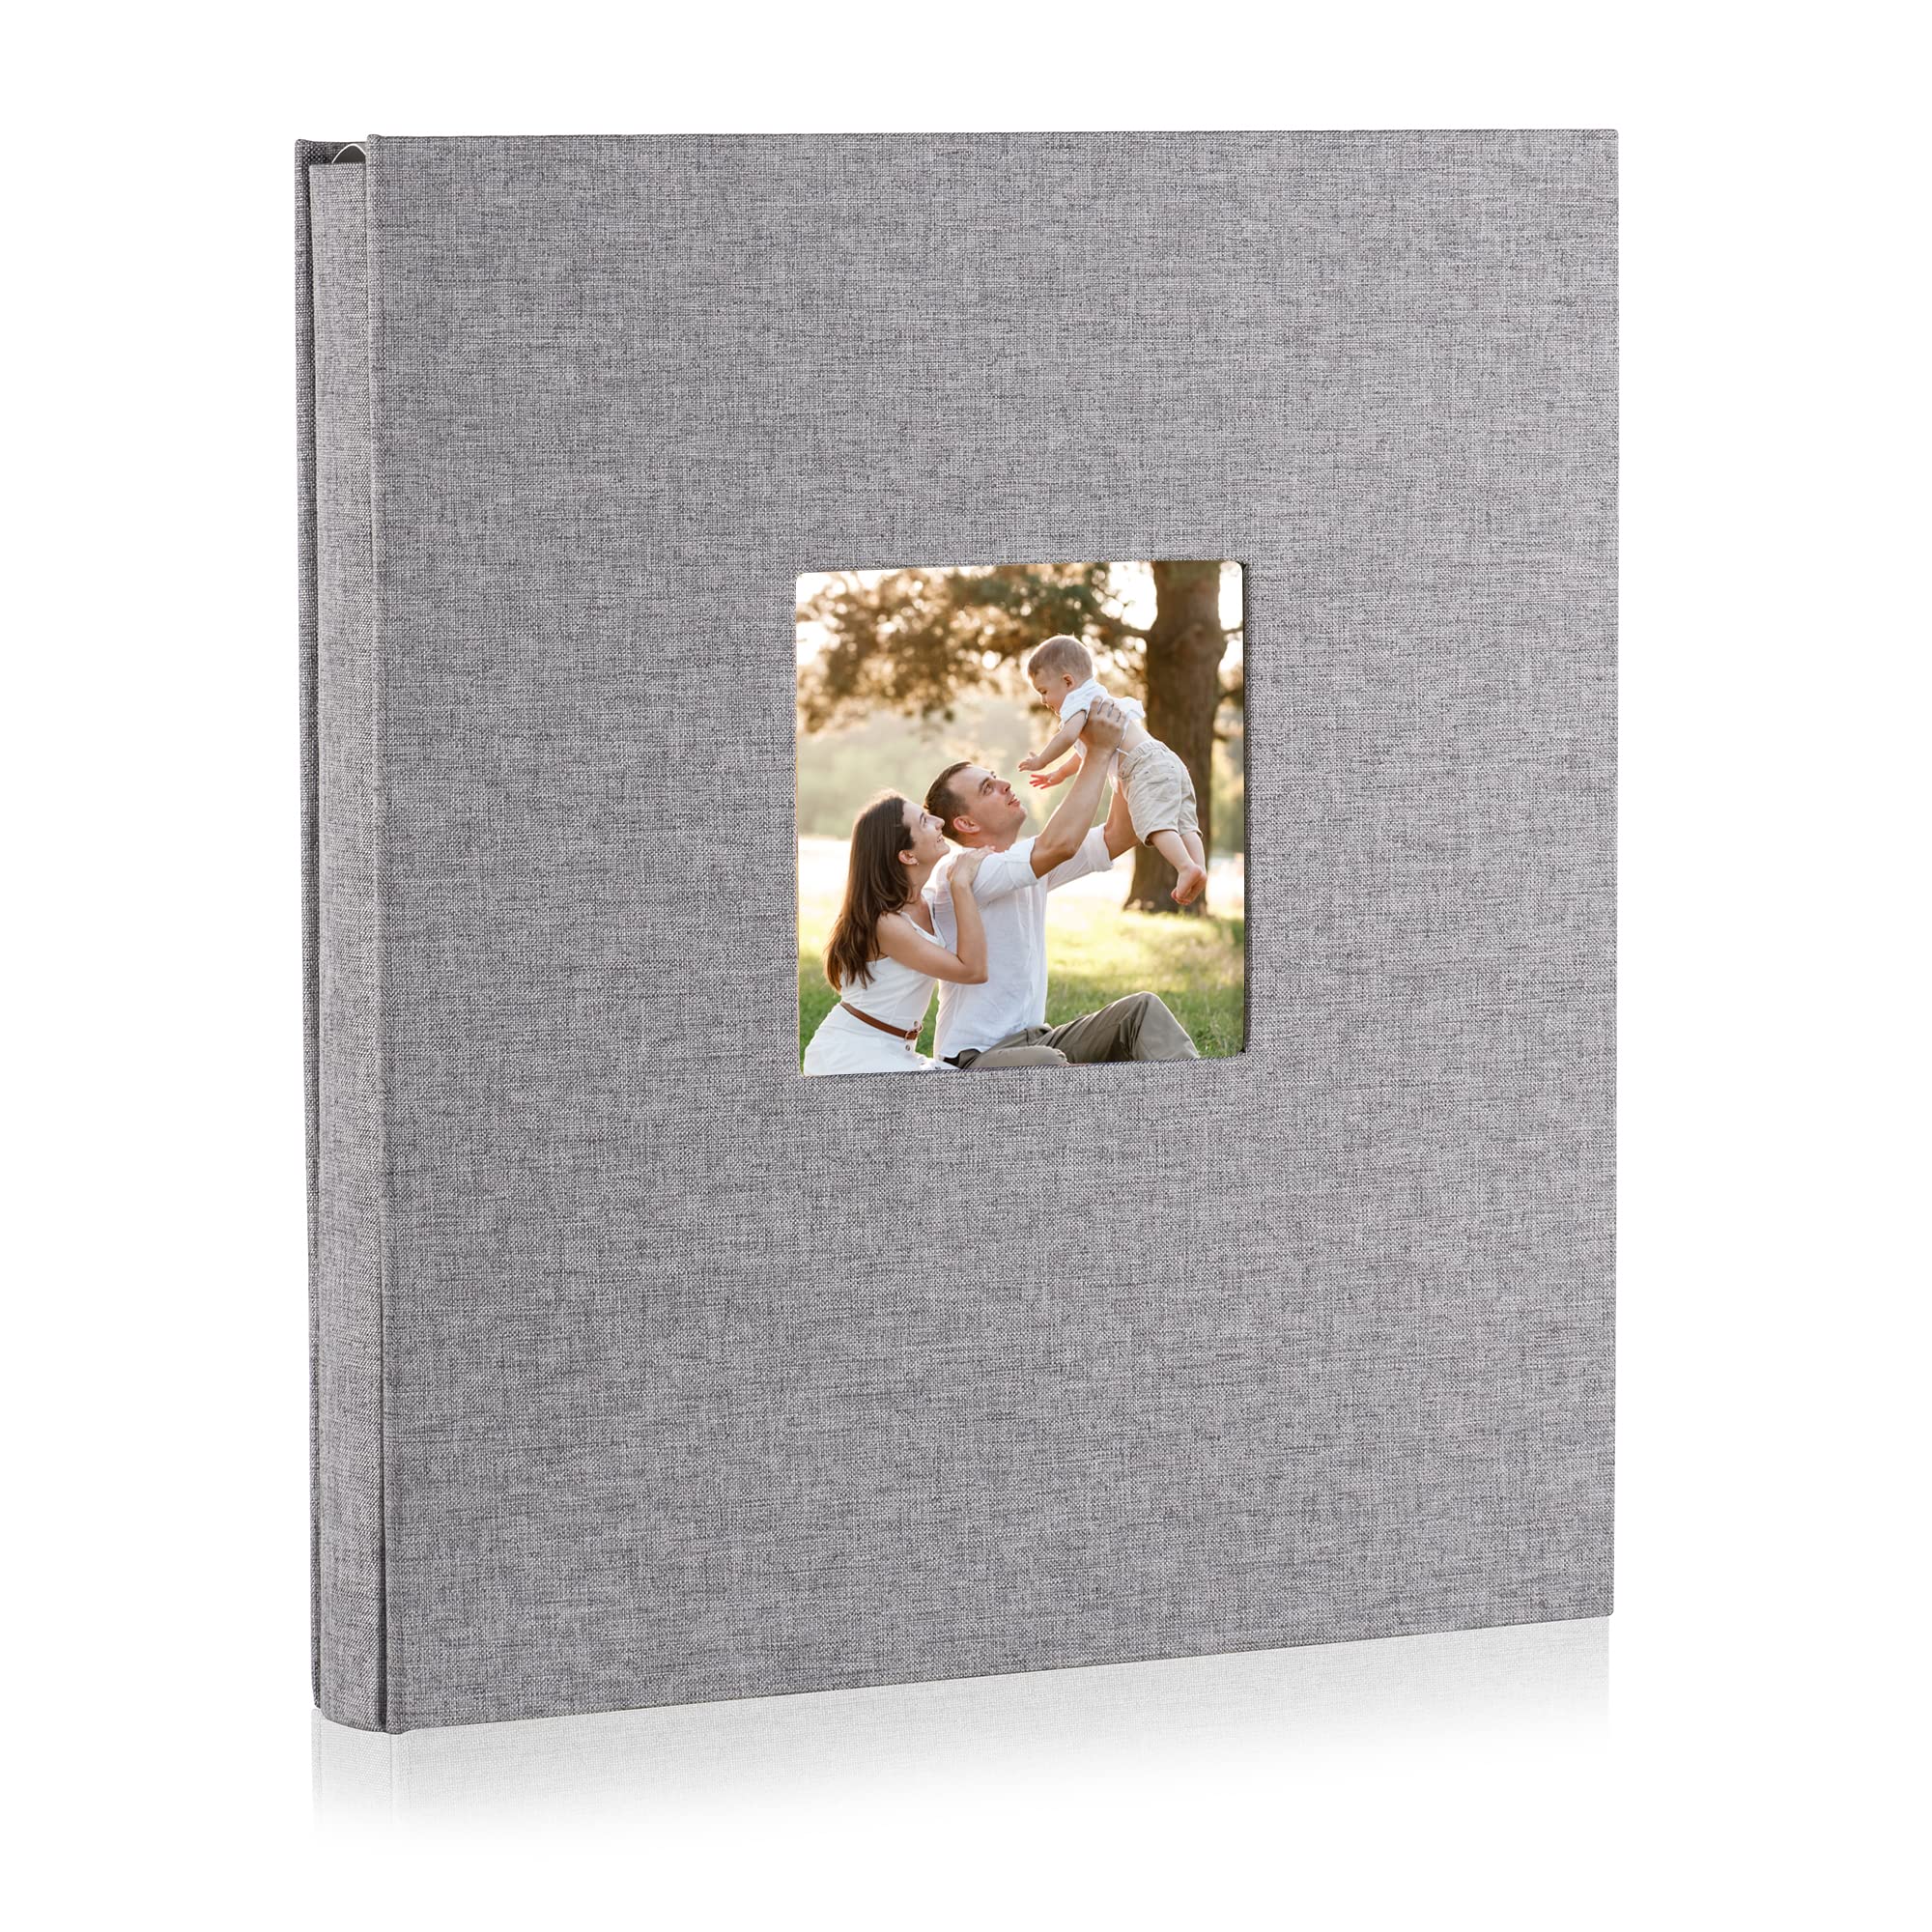 Popotop Photo Album 4x6 600 Pockets,Linen Hardcover Picture Albums for Family Wedding Anniversary Baby Vacation Pictures